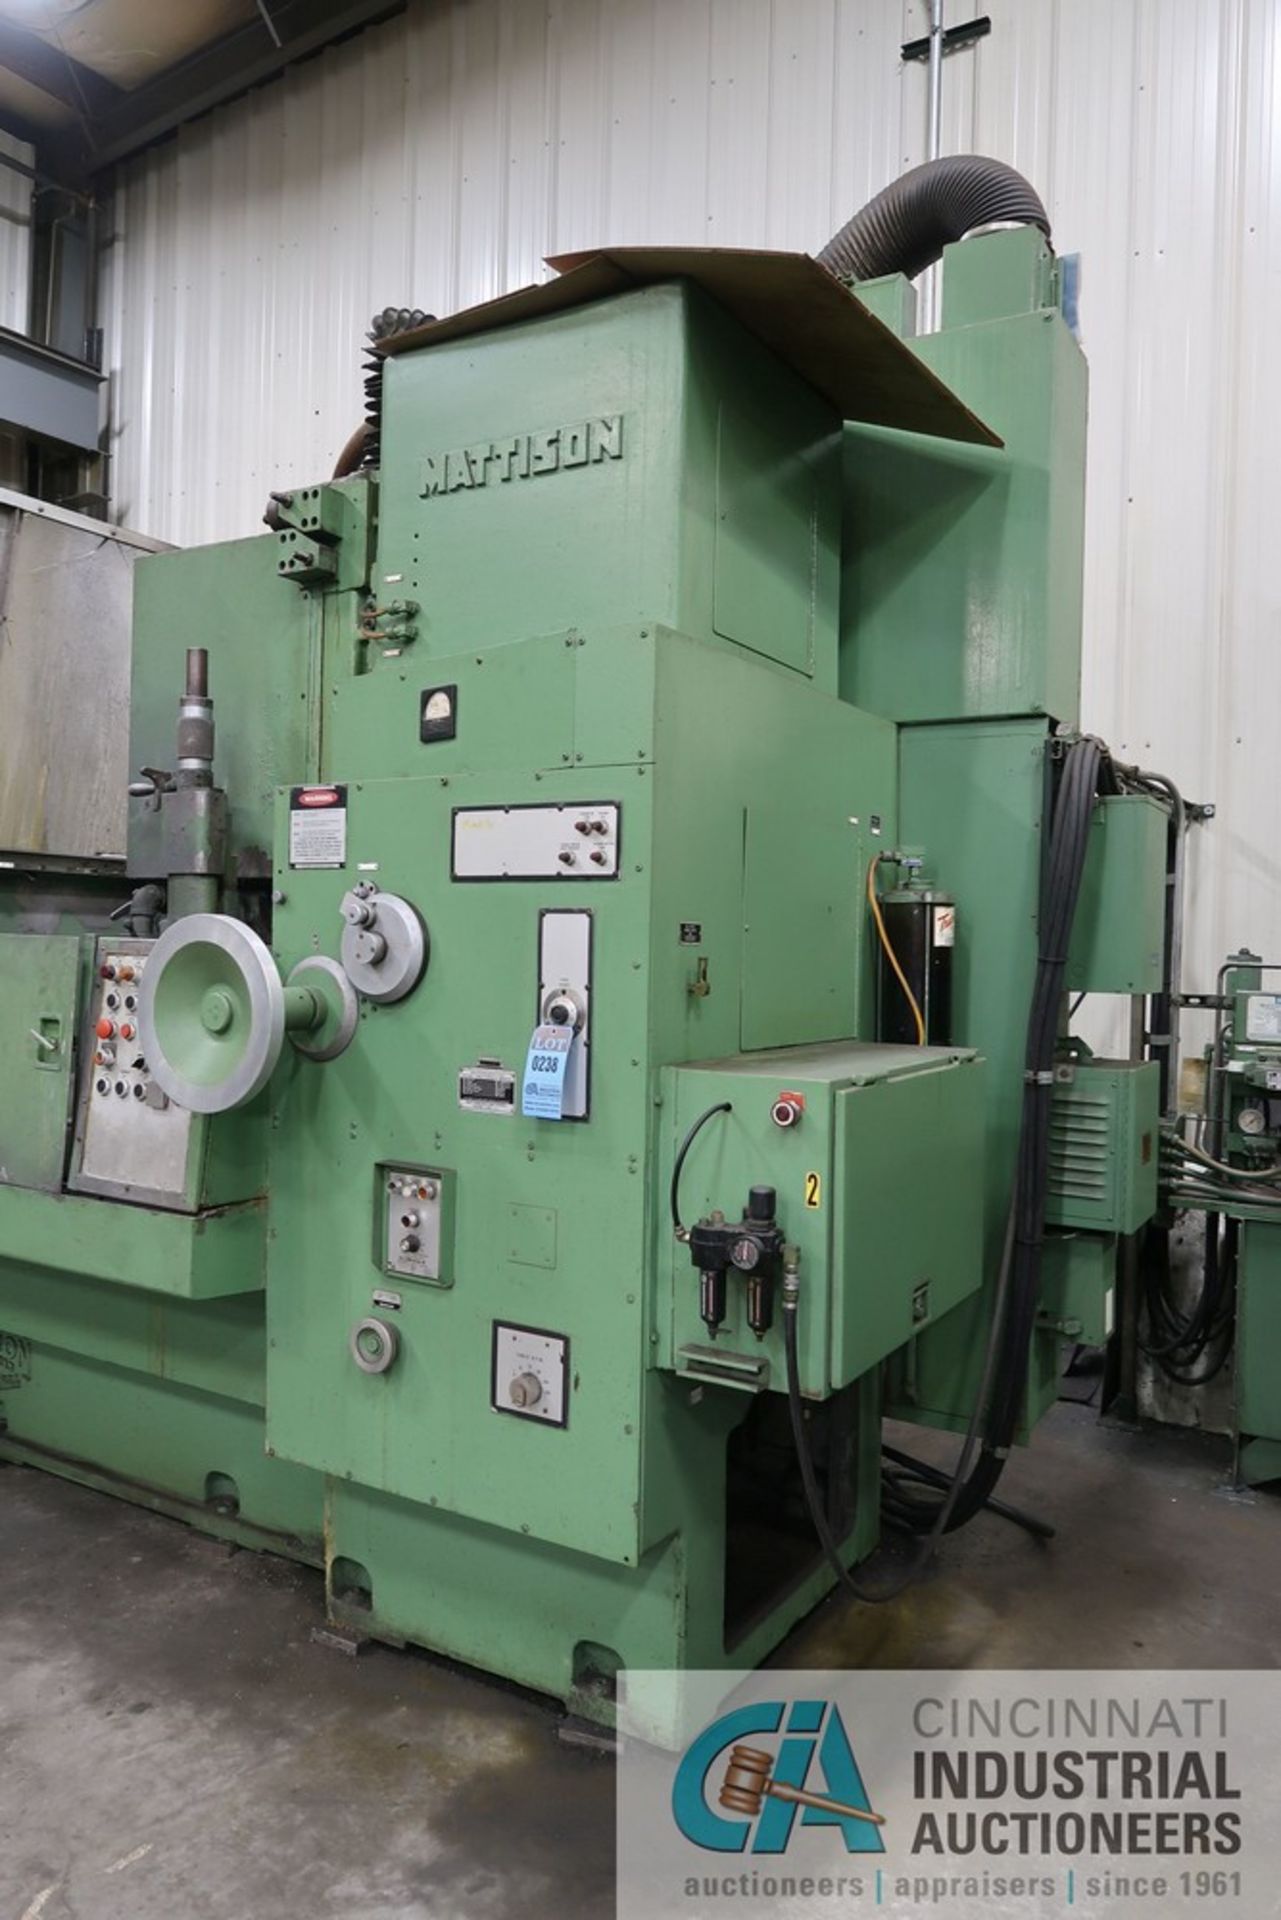 48" DIAMETER MATTISON ROTARY TABLE SURFACE GRINDER; S/N 24-799, 75 HP MOTOR, COOLANT FILTRATION, - Image 7 of 16